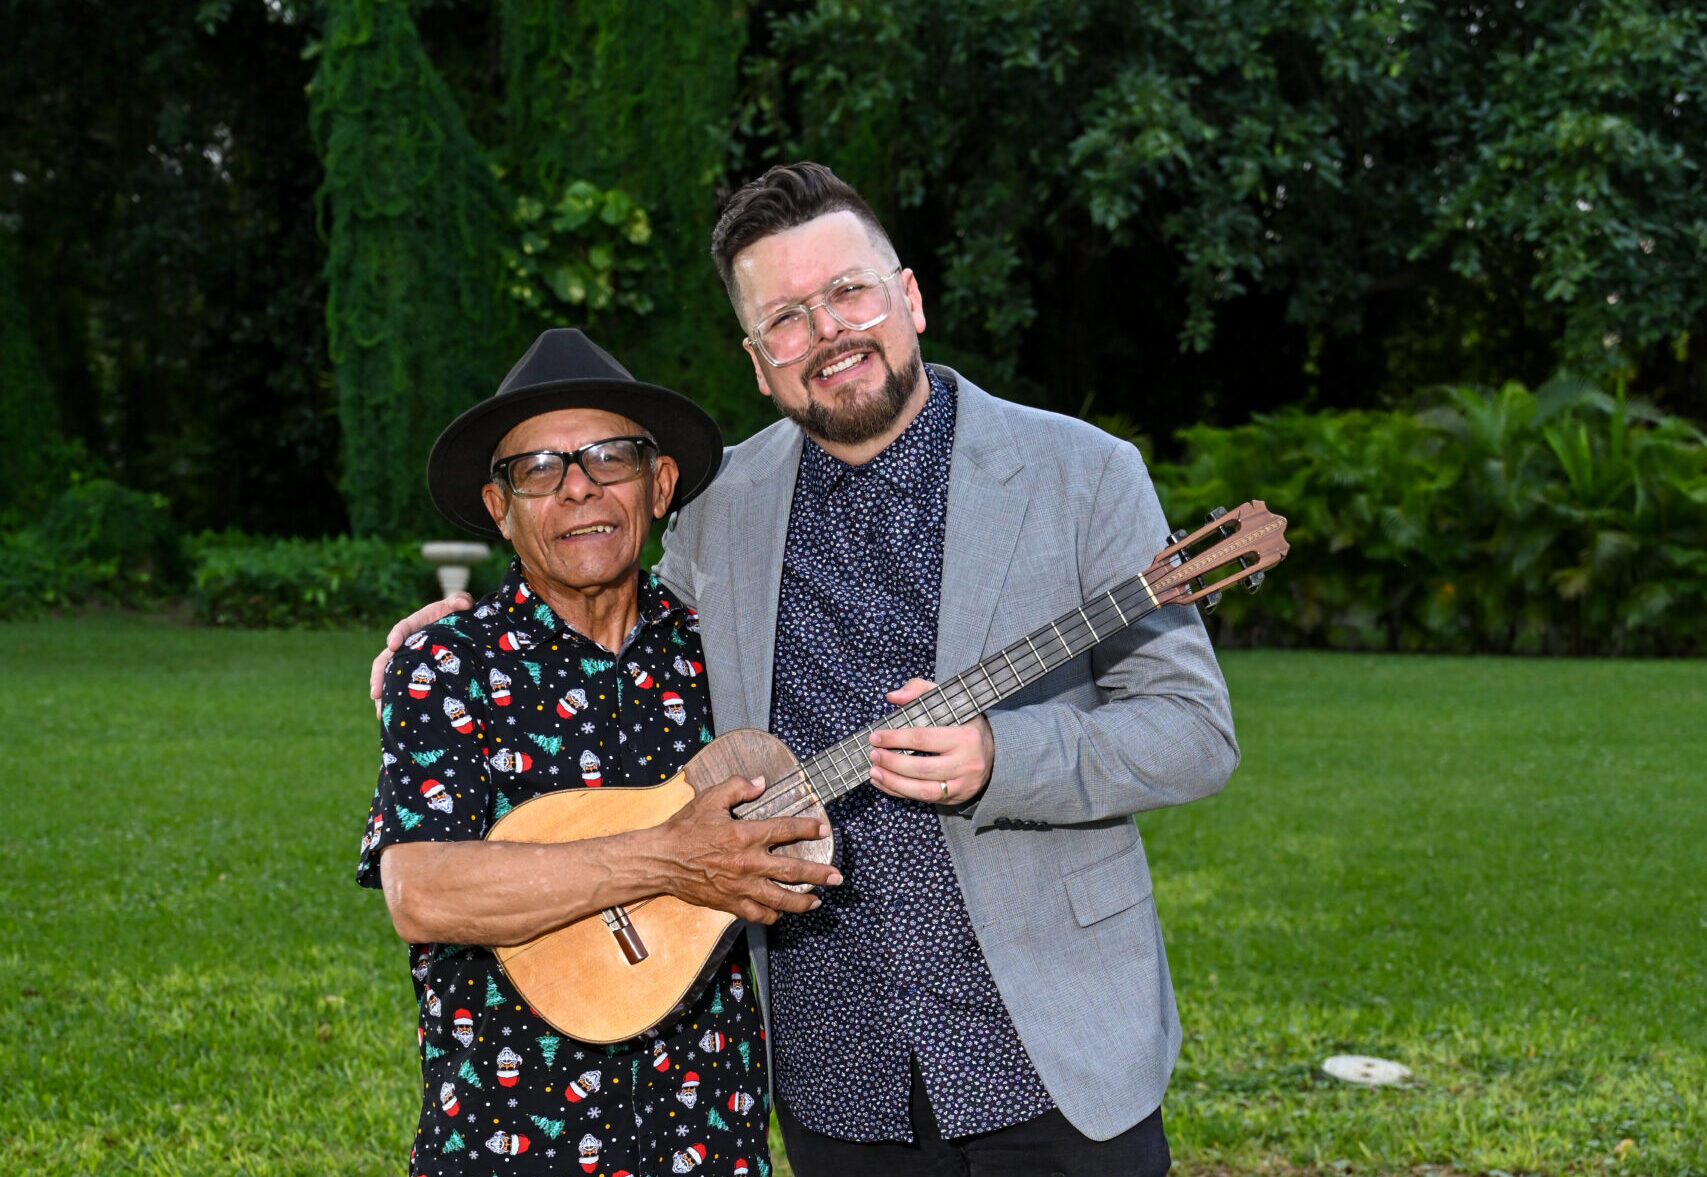 Henry Linarez poses with his father as they both hold the cuatro guitar in their hands.